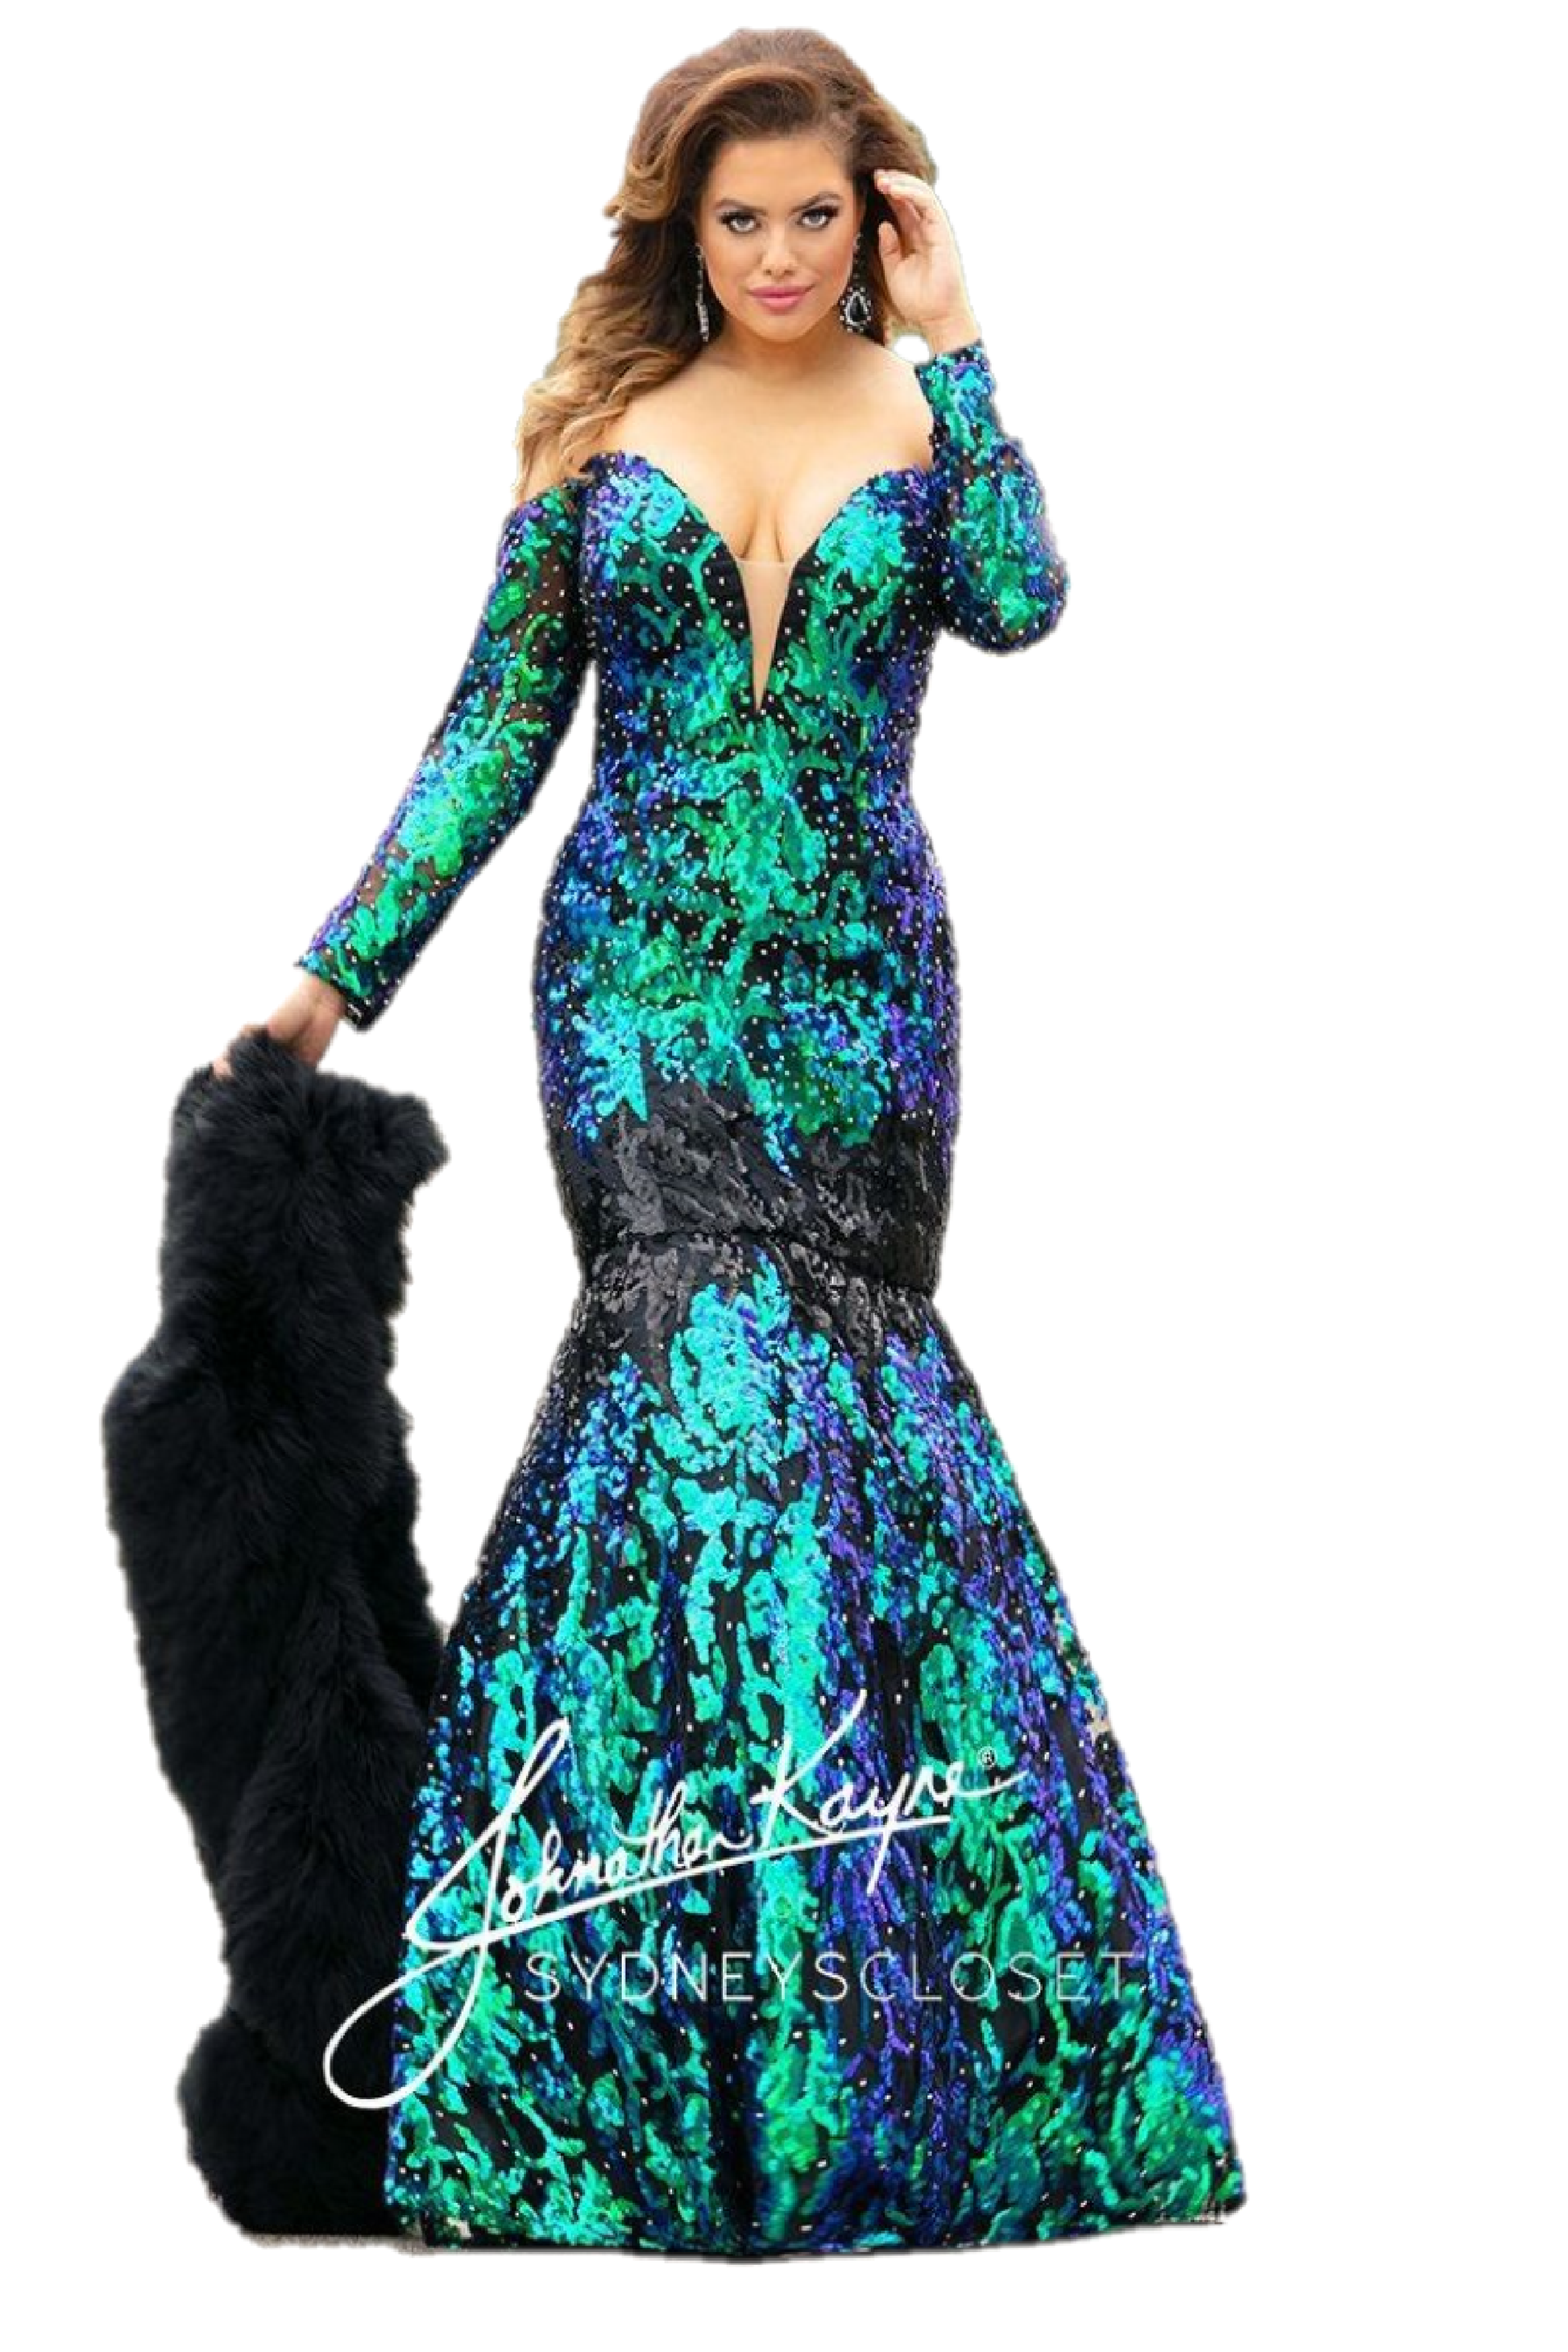 Johnathan Kayne for Sydneys Closet JK2010 Cobra off the shoulder long sleeves plunging neckline mermaid plus size prom dress with corset back embellished with stones. Long Sequin Mermaid Pageant Gown. Sexy Plunging Neckline with sheer embellished off the shoulder long sleeves. Stunning Multi Sequin pattern. Lace up corset back closure for a perfect & Accentuating fit!  Available colors:  Emerald Isle JK 2010